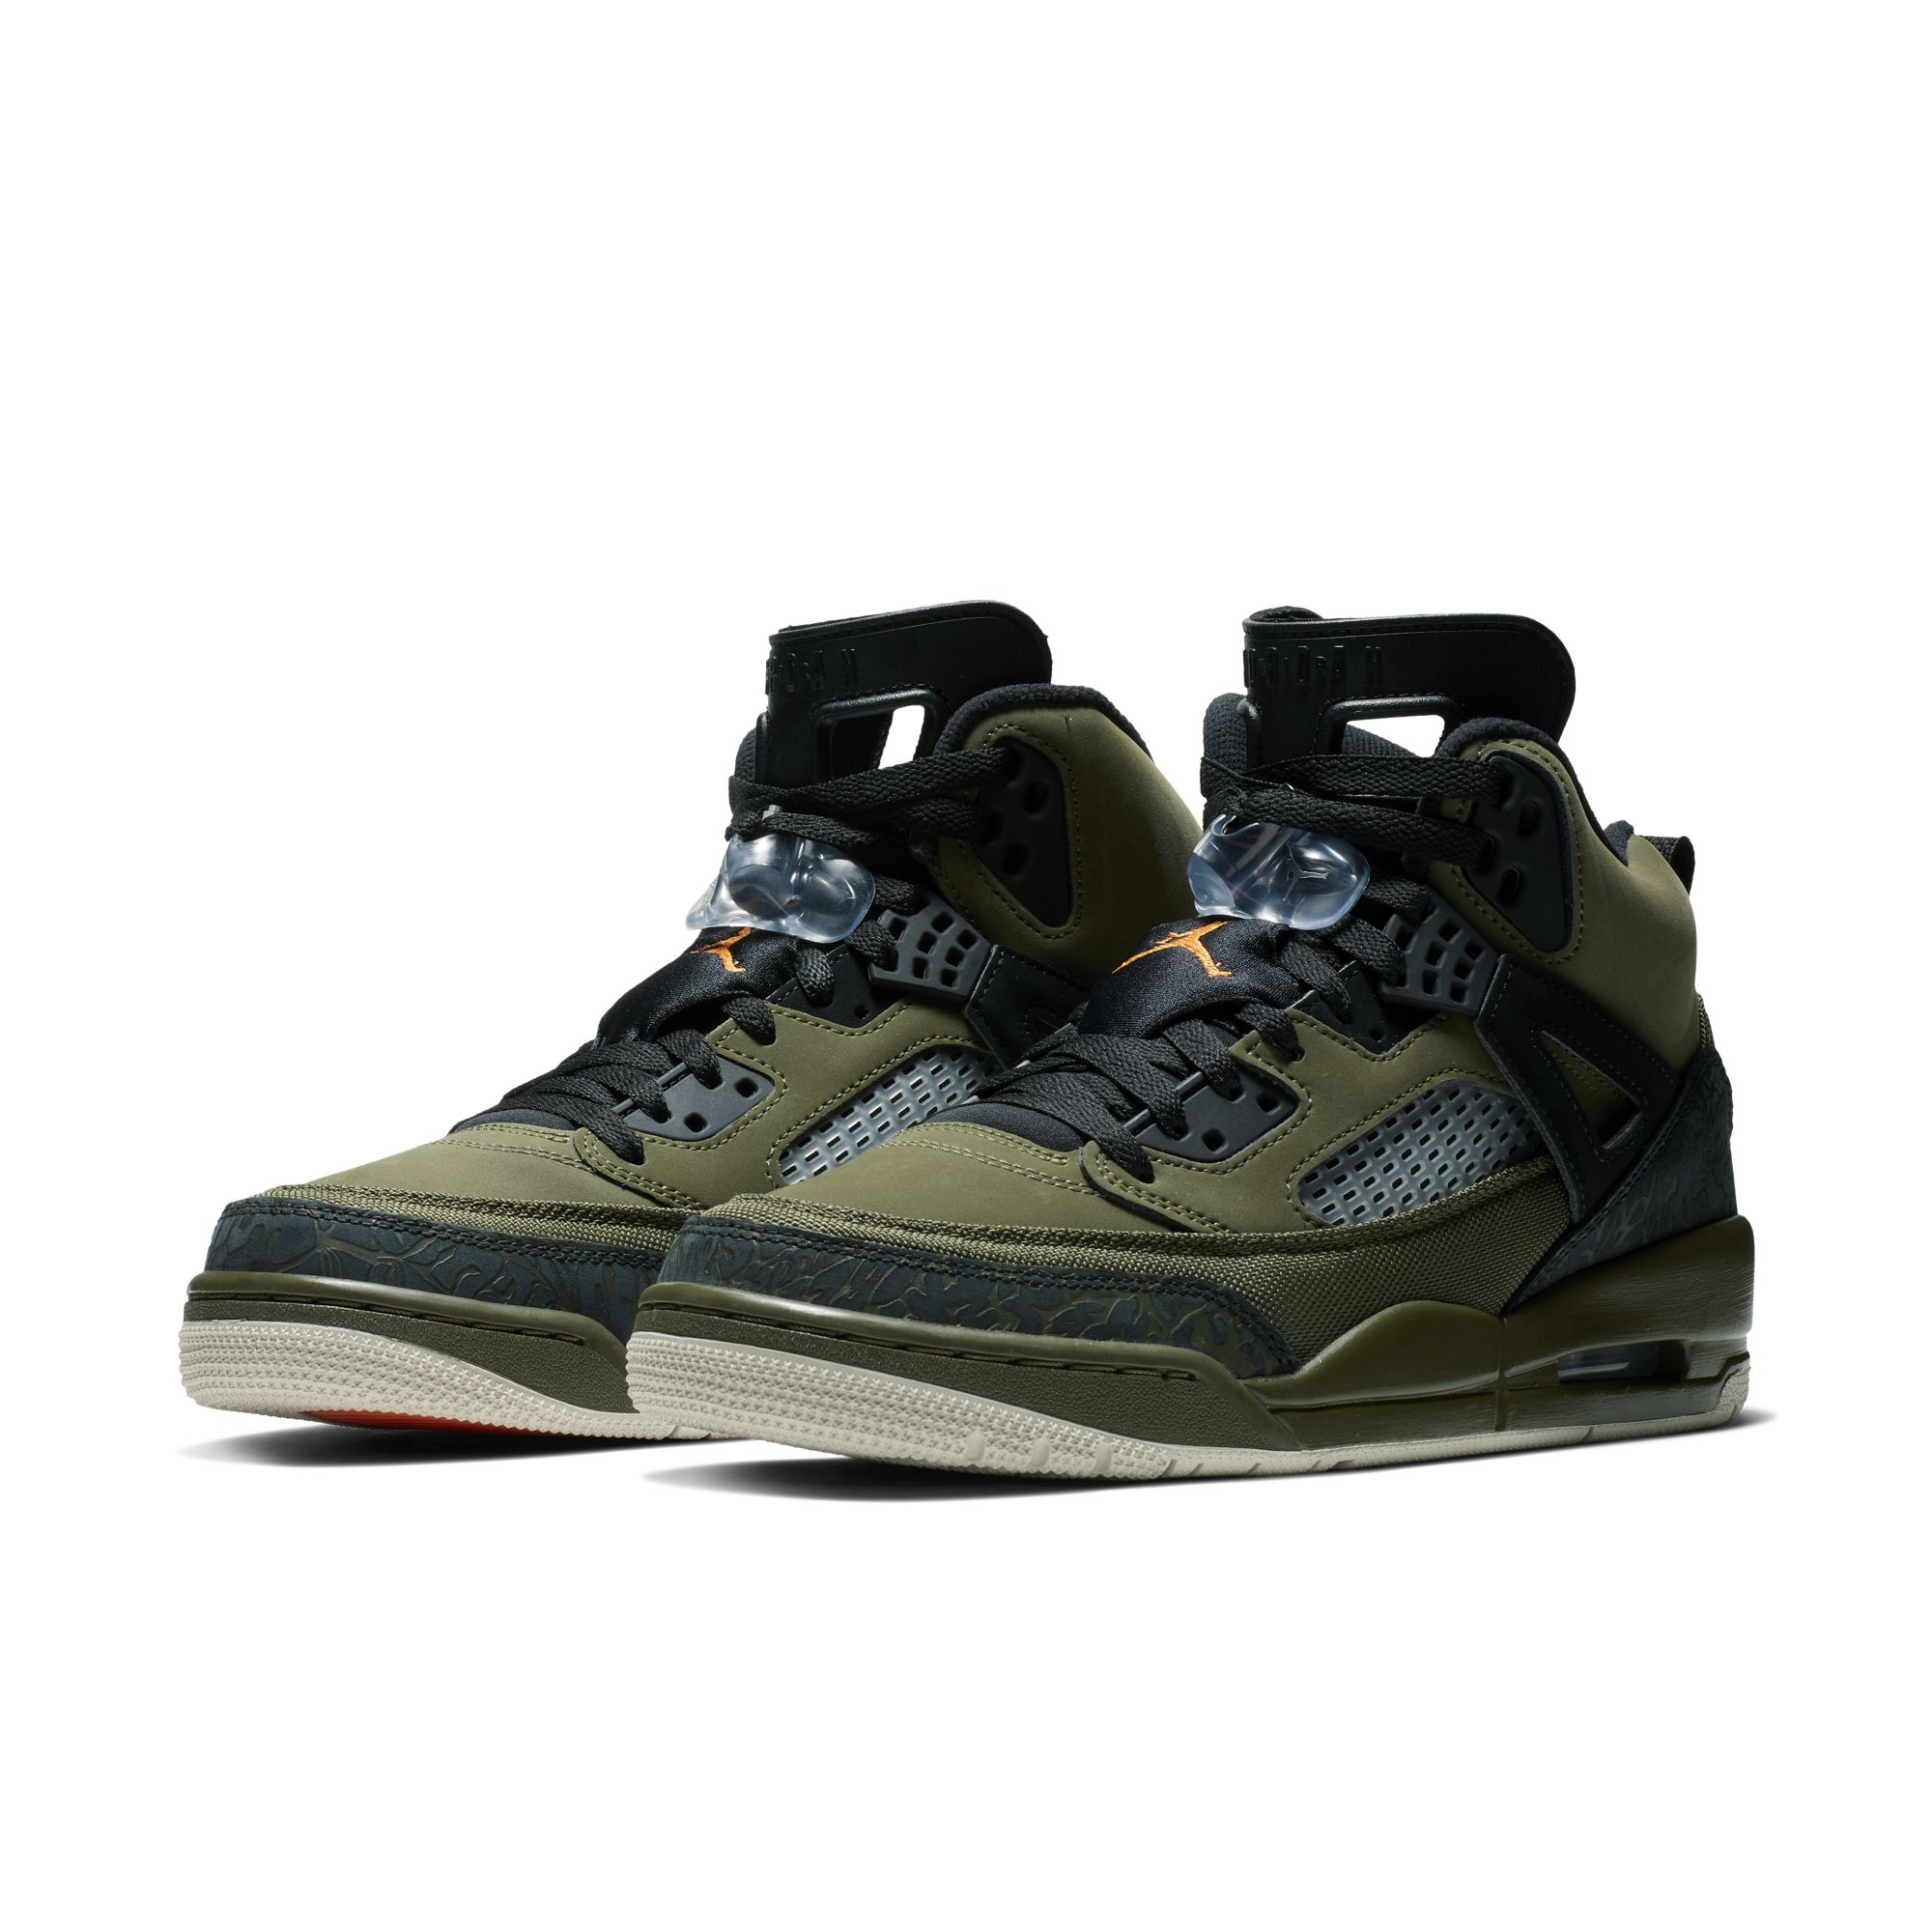 This Olive Green Jordan Spizike May Be 